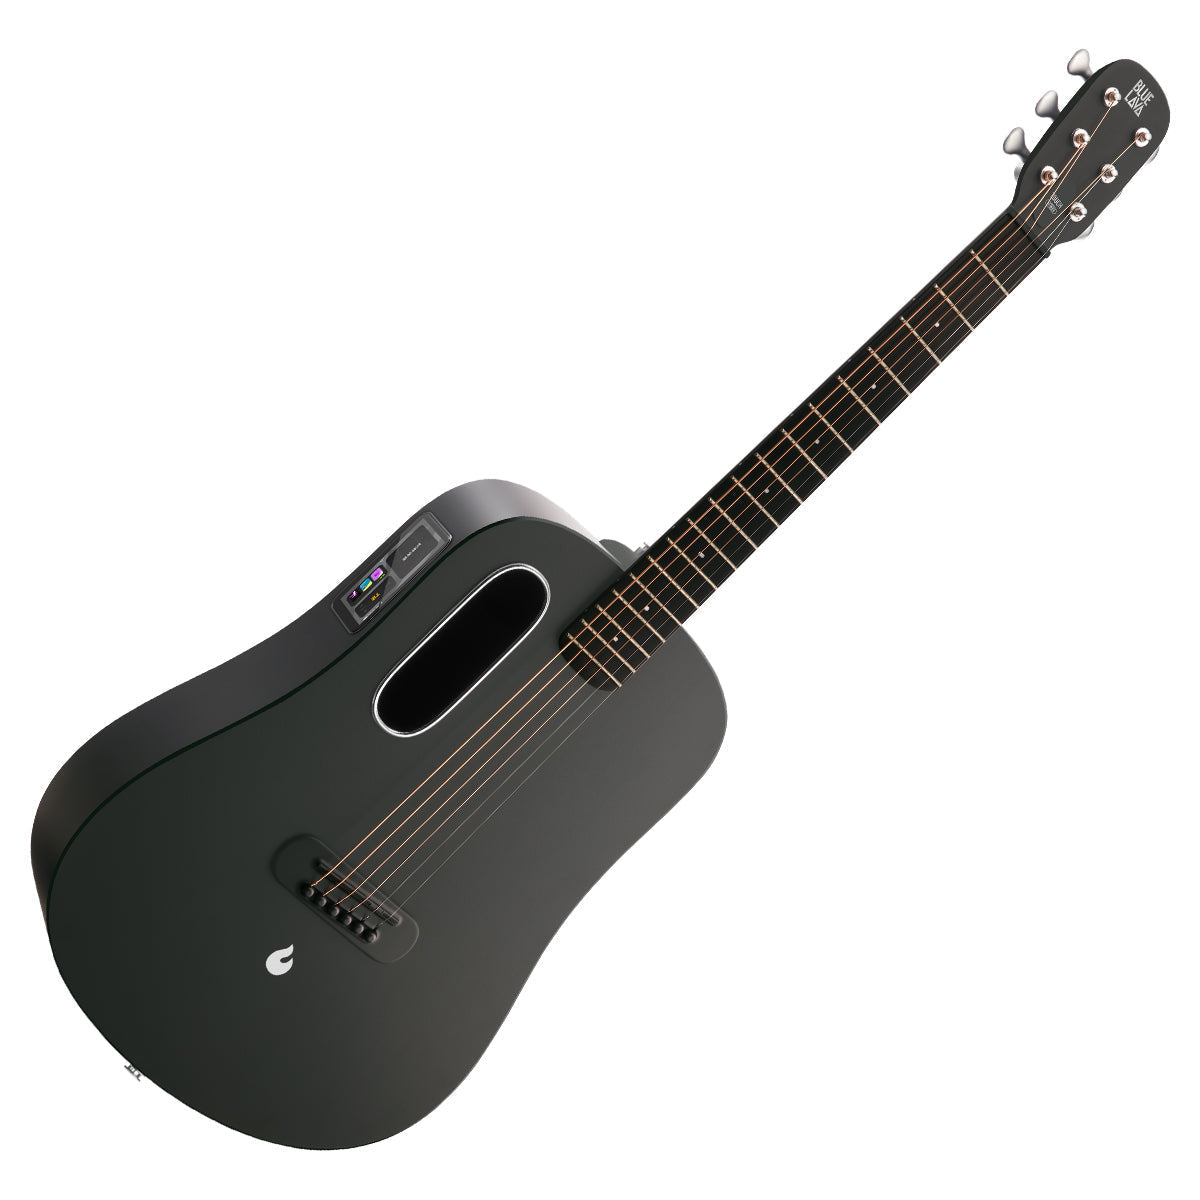 BLUE LAVA TOUCH with Lite Bag ~ Midnight Black, Acoustic Guitar for sale at Richards Guitars.